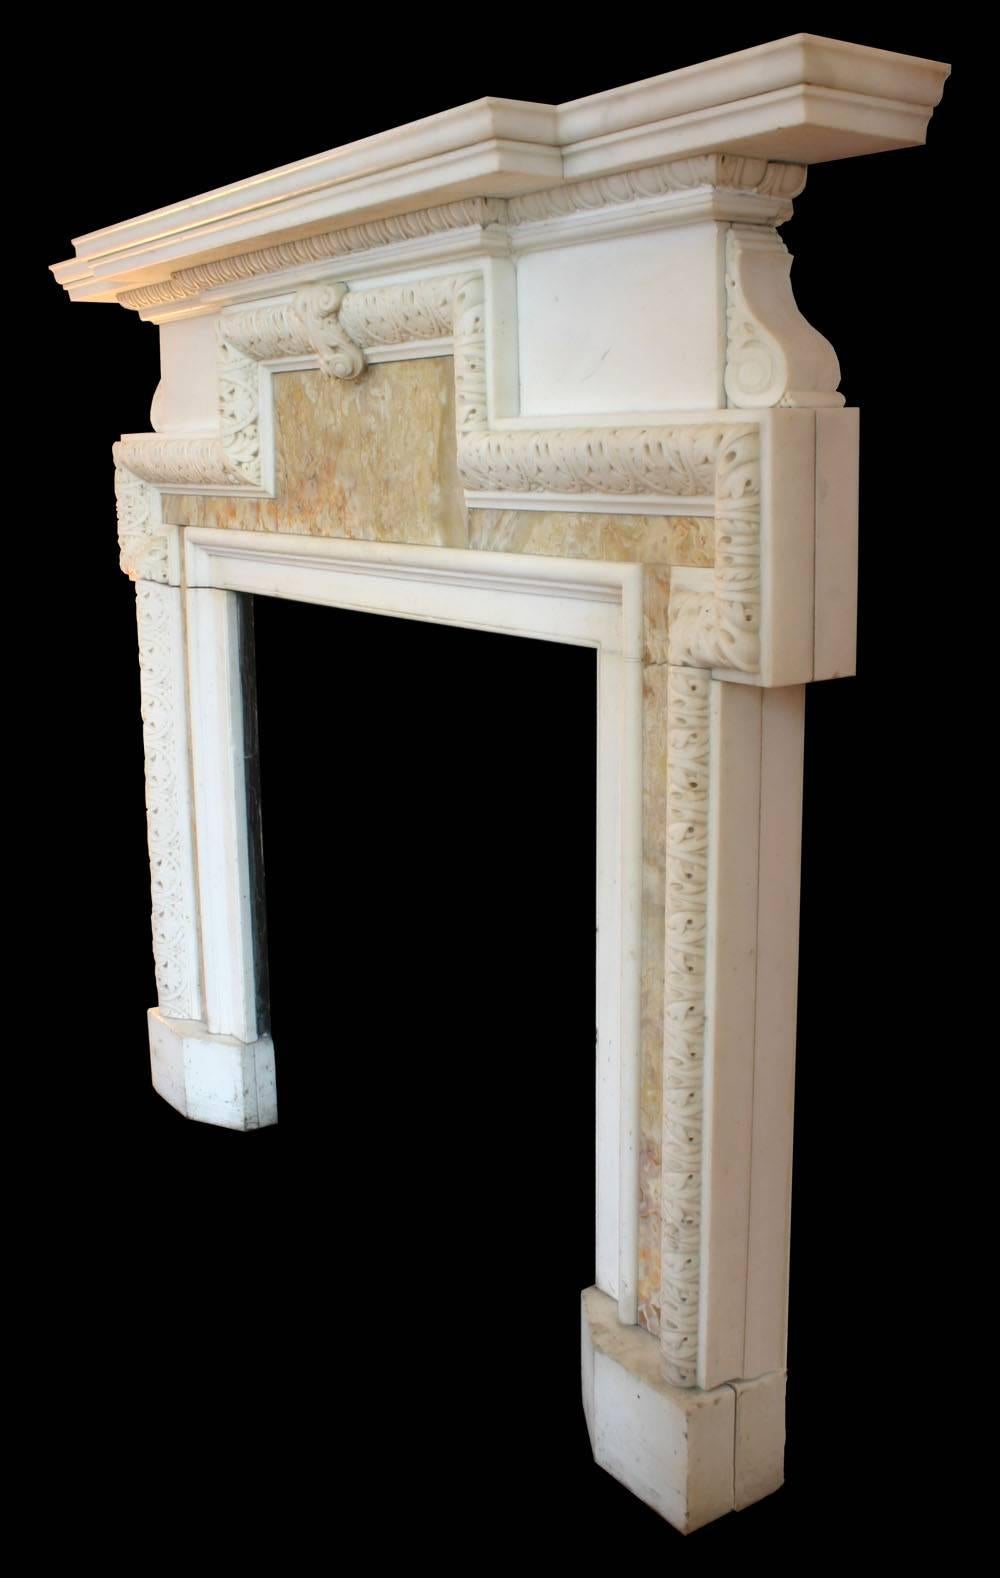 Very fine antique late Georgian statuary white marble chimneypiece with elaborately carved eared moldings which enclose specimen alabaster panels. Images prior to restoration. When this fireplace is purchased it will then be fully restored. The